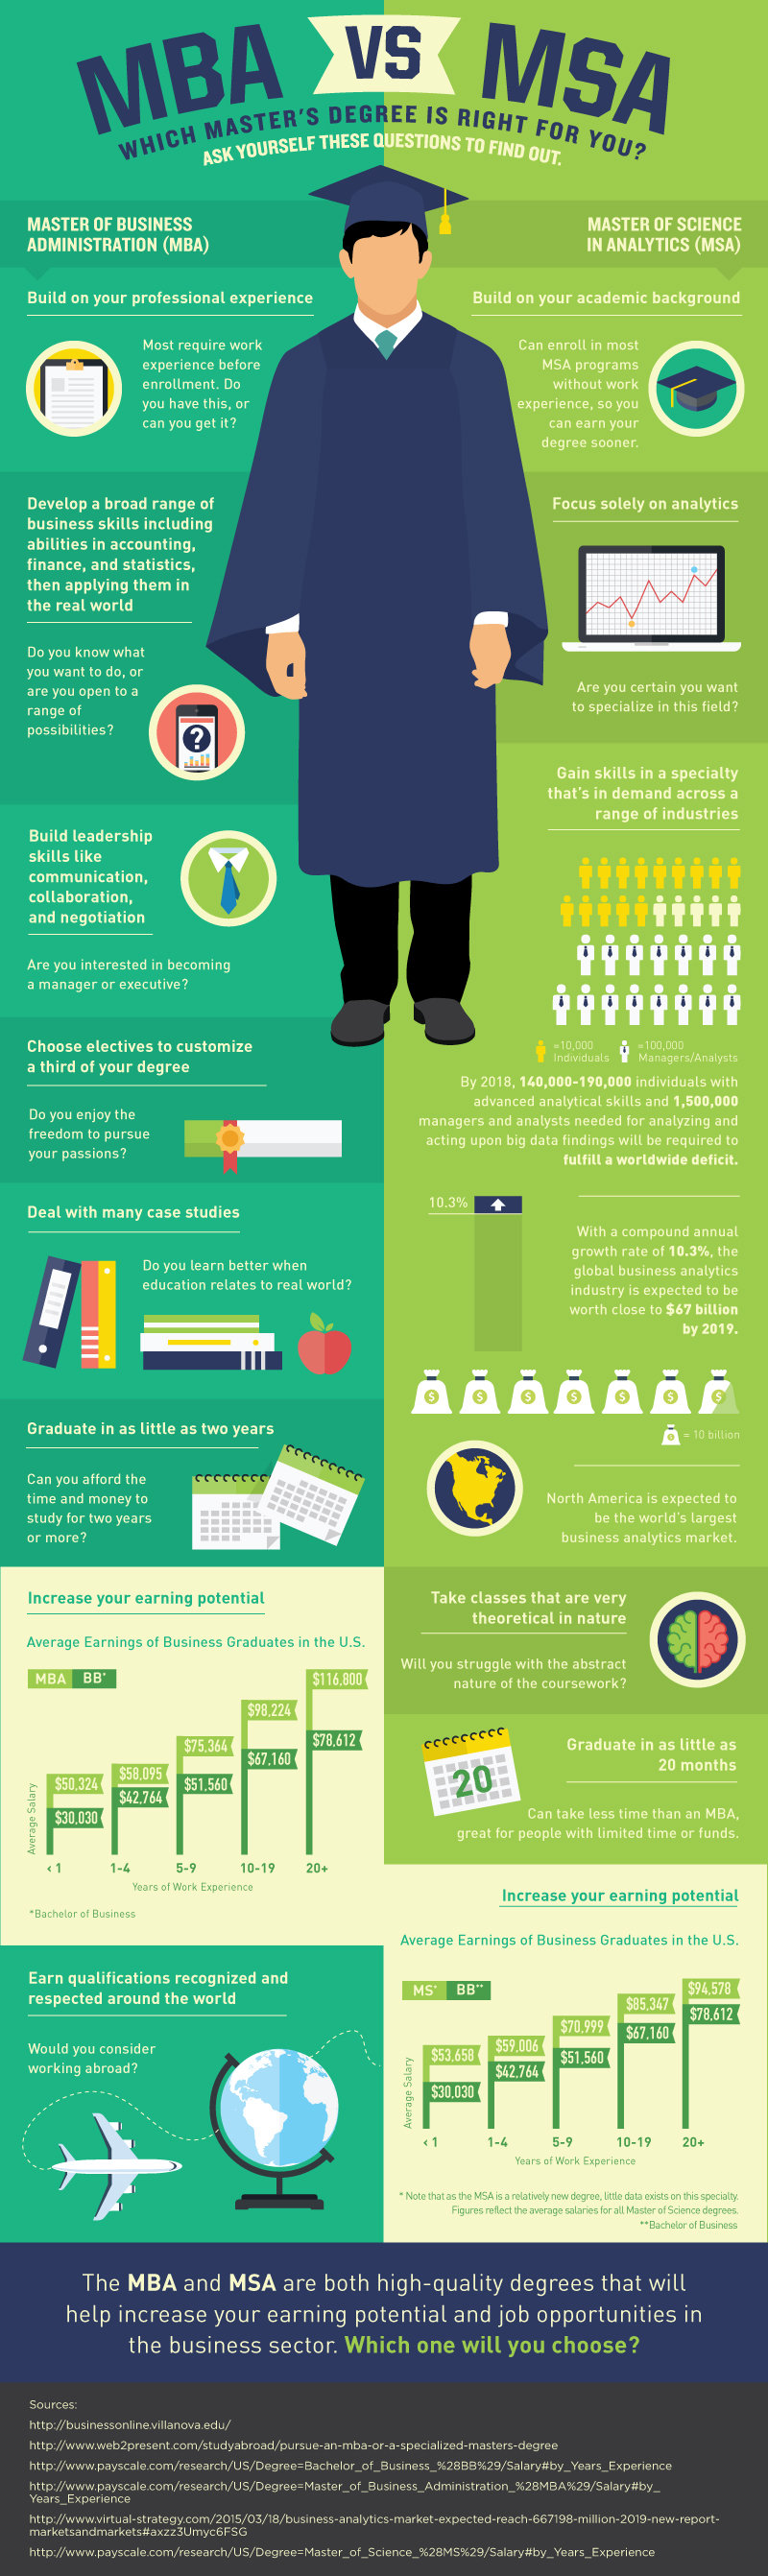 MBA vs. MSA Which One is The Best for CEOs? (Infographic) SMALL BUSINESS CEO